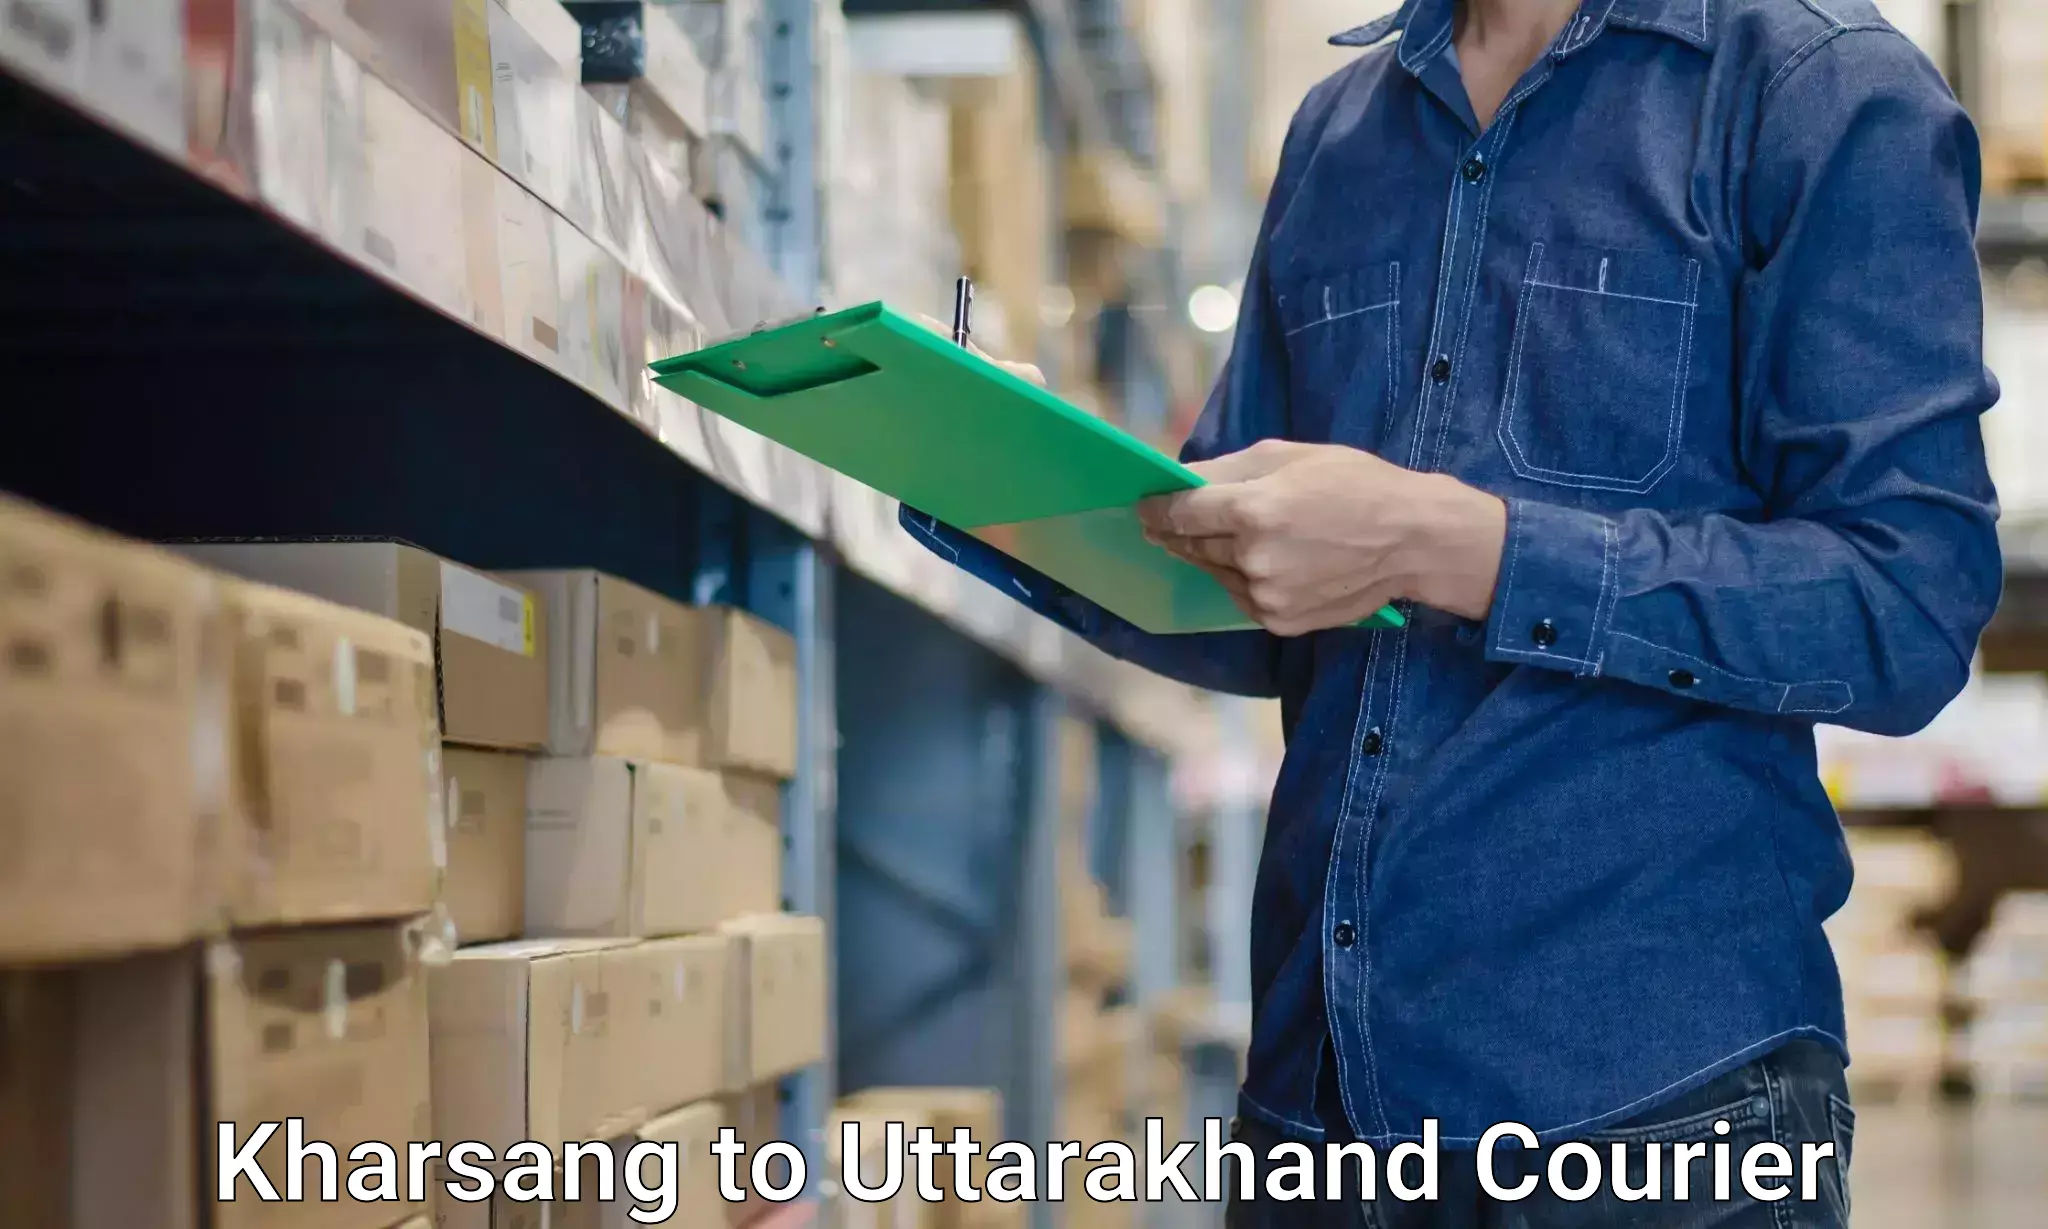 Expert moving and storage in Kharsang to Almora